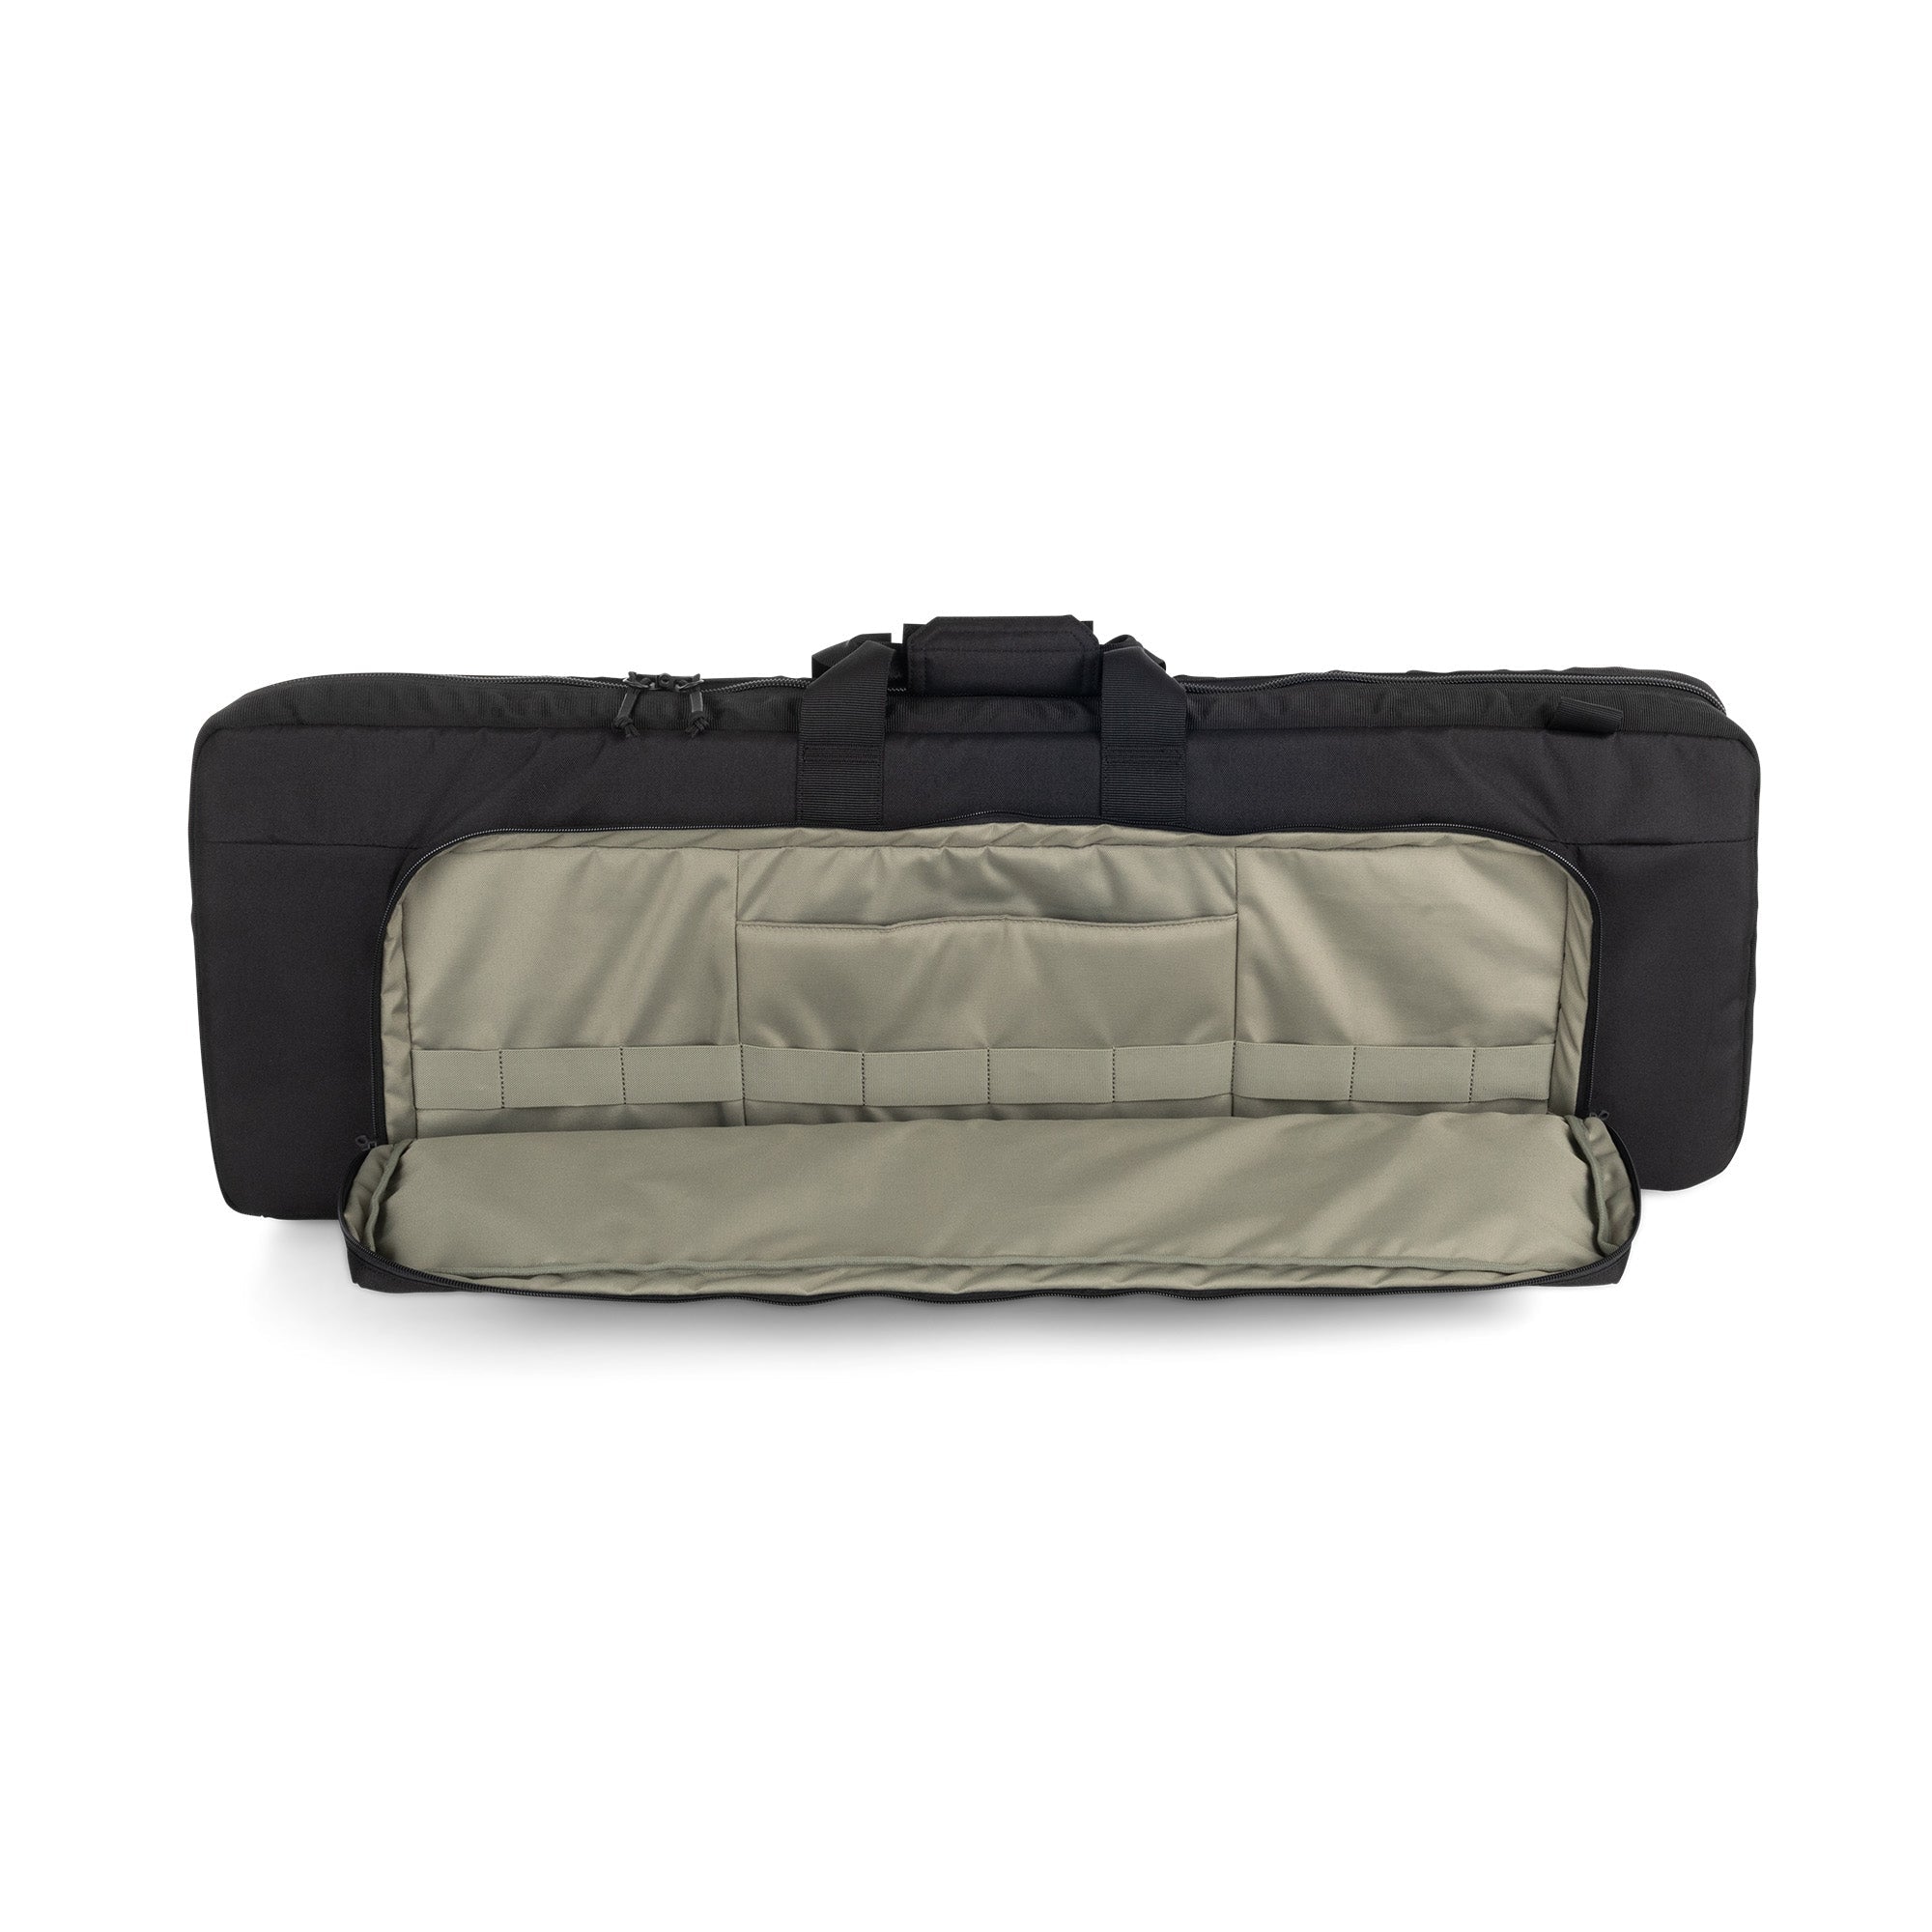 5.11 Tactical 36" Double Rifle Case 31L Bags, Packs and Cases 5.11 Tactical Tactical Gear Supplier Tactical Distributors Australia